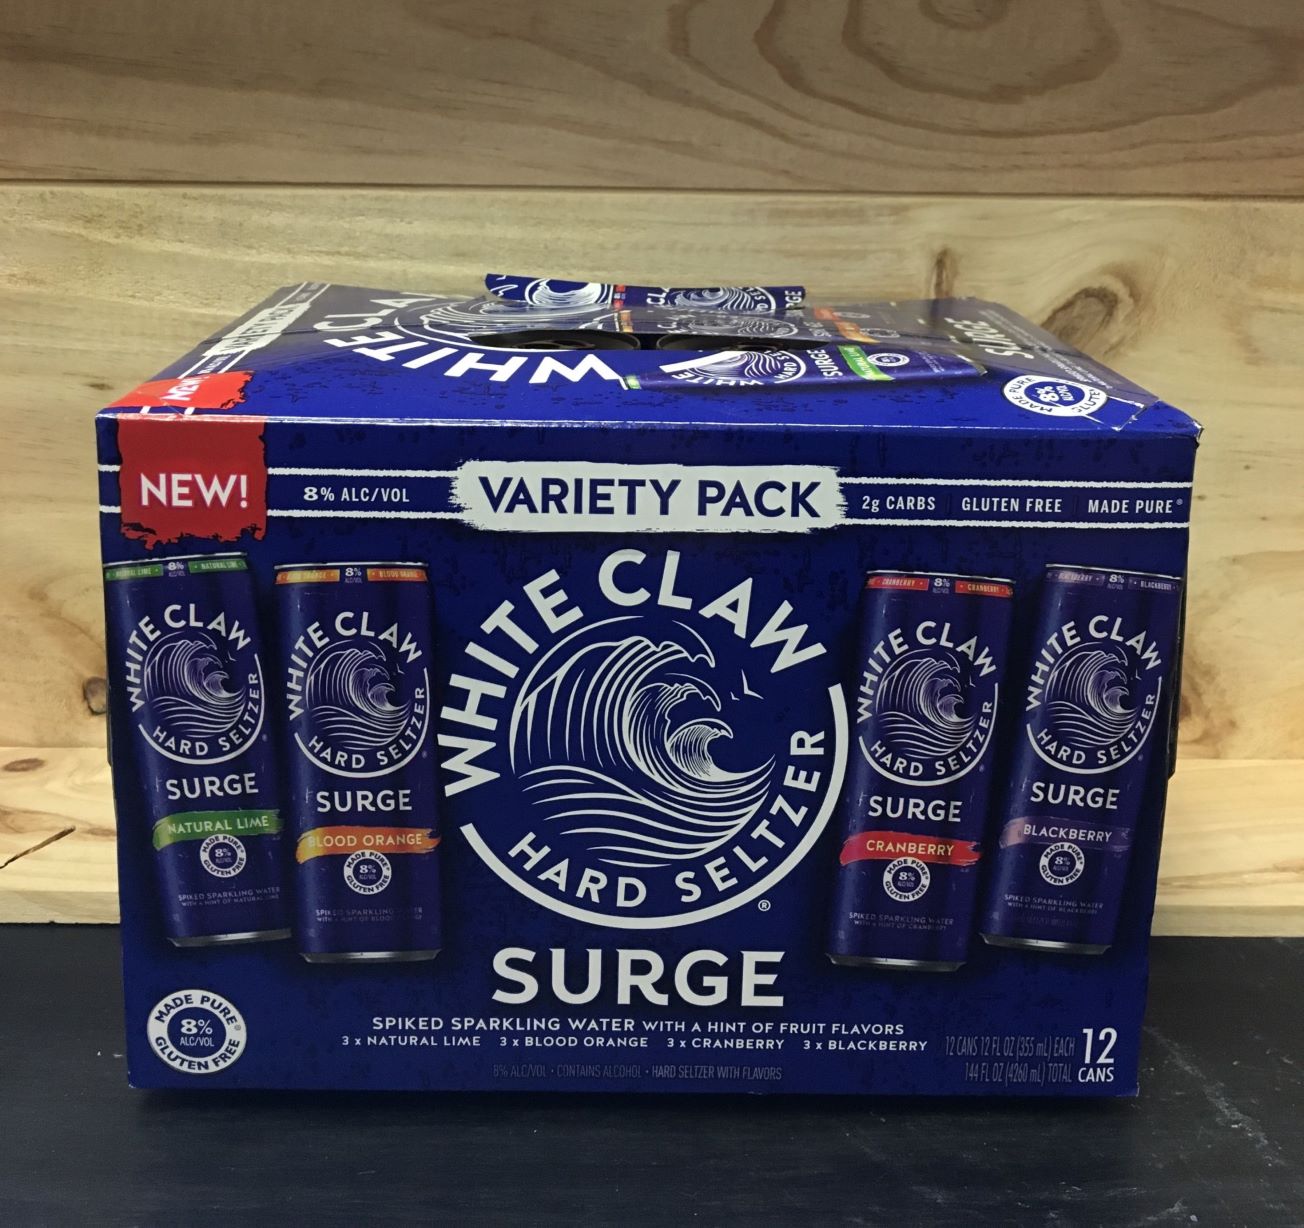 20-white-claw-surge-nutrition-facts